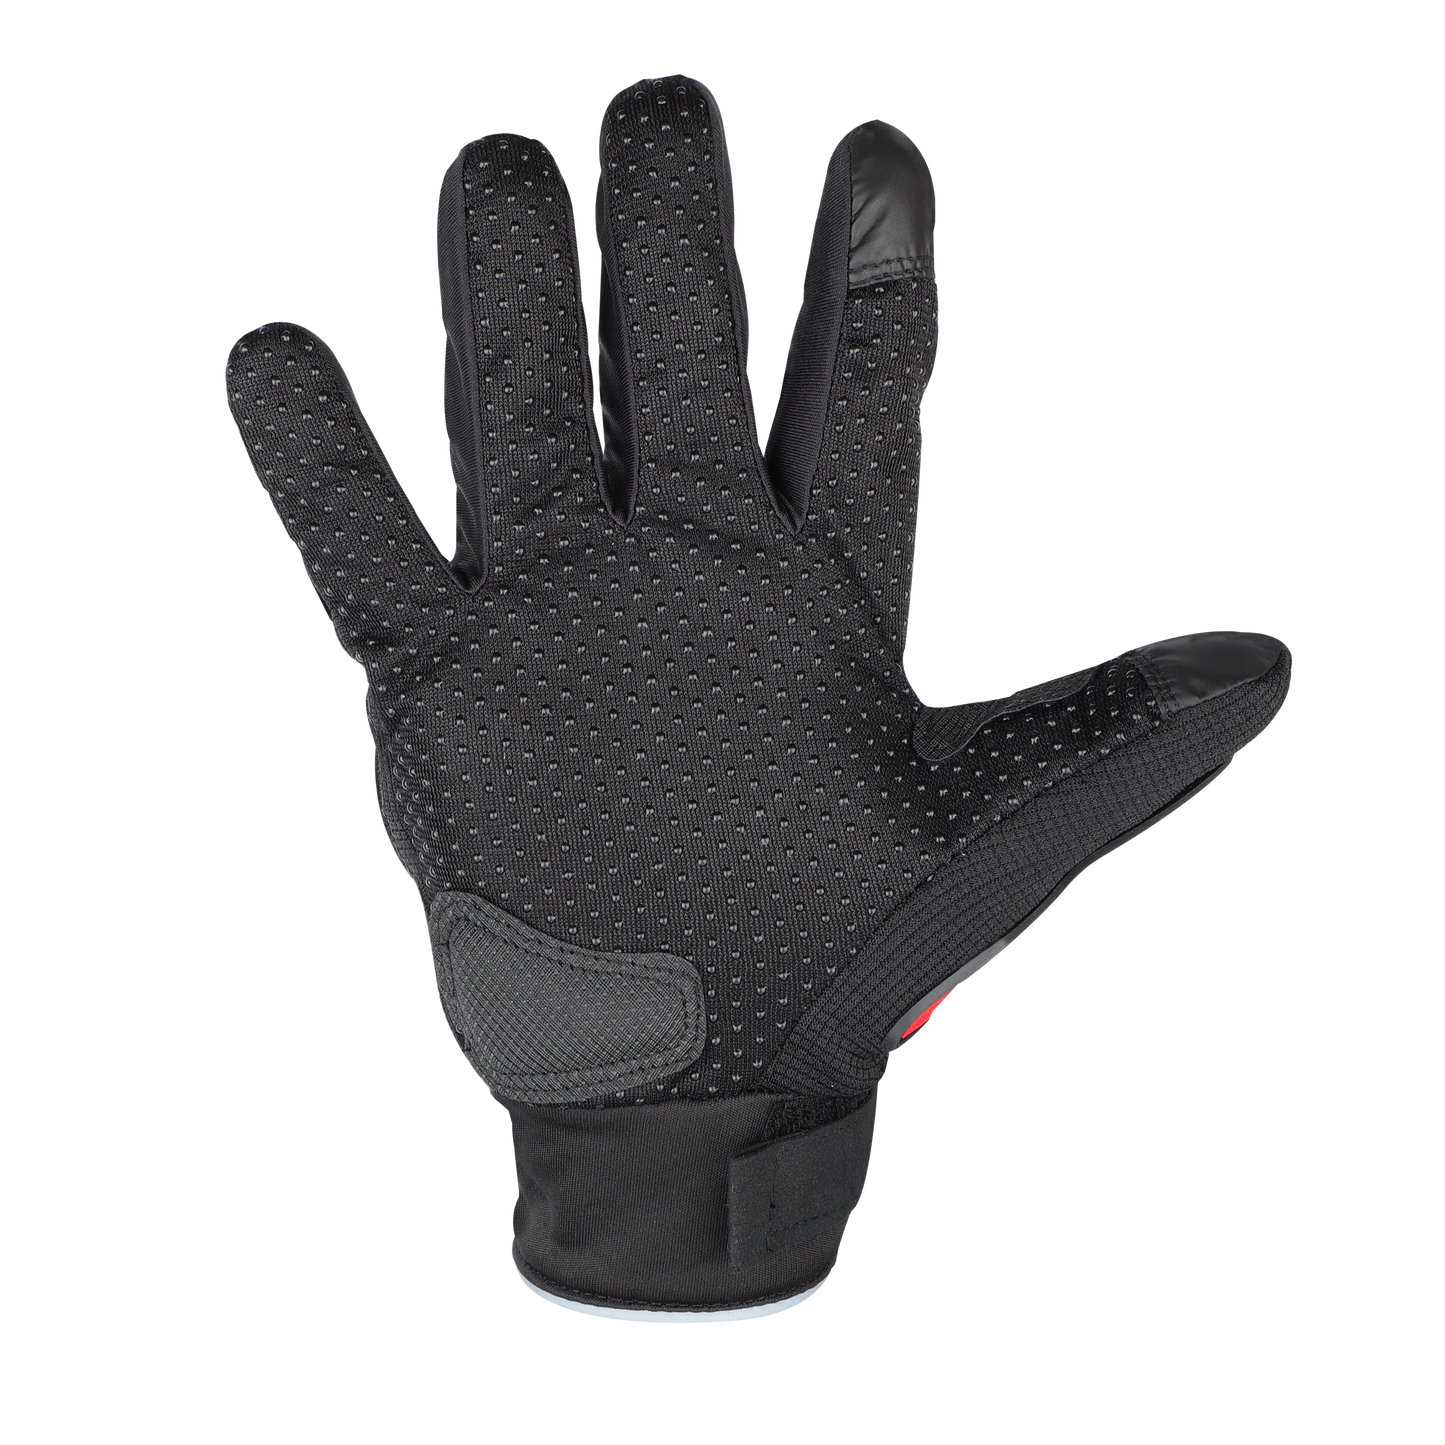 Steelbird Full Finger Bike Riding Gloves with Touch Screen Sensitivity at Thumb and Index Finger, Protective Off-Road Motorbike Racing (Black Red)